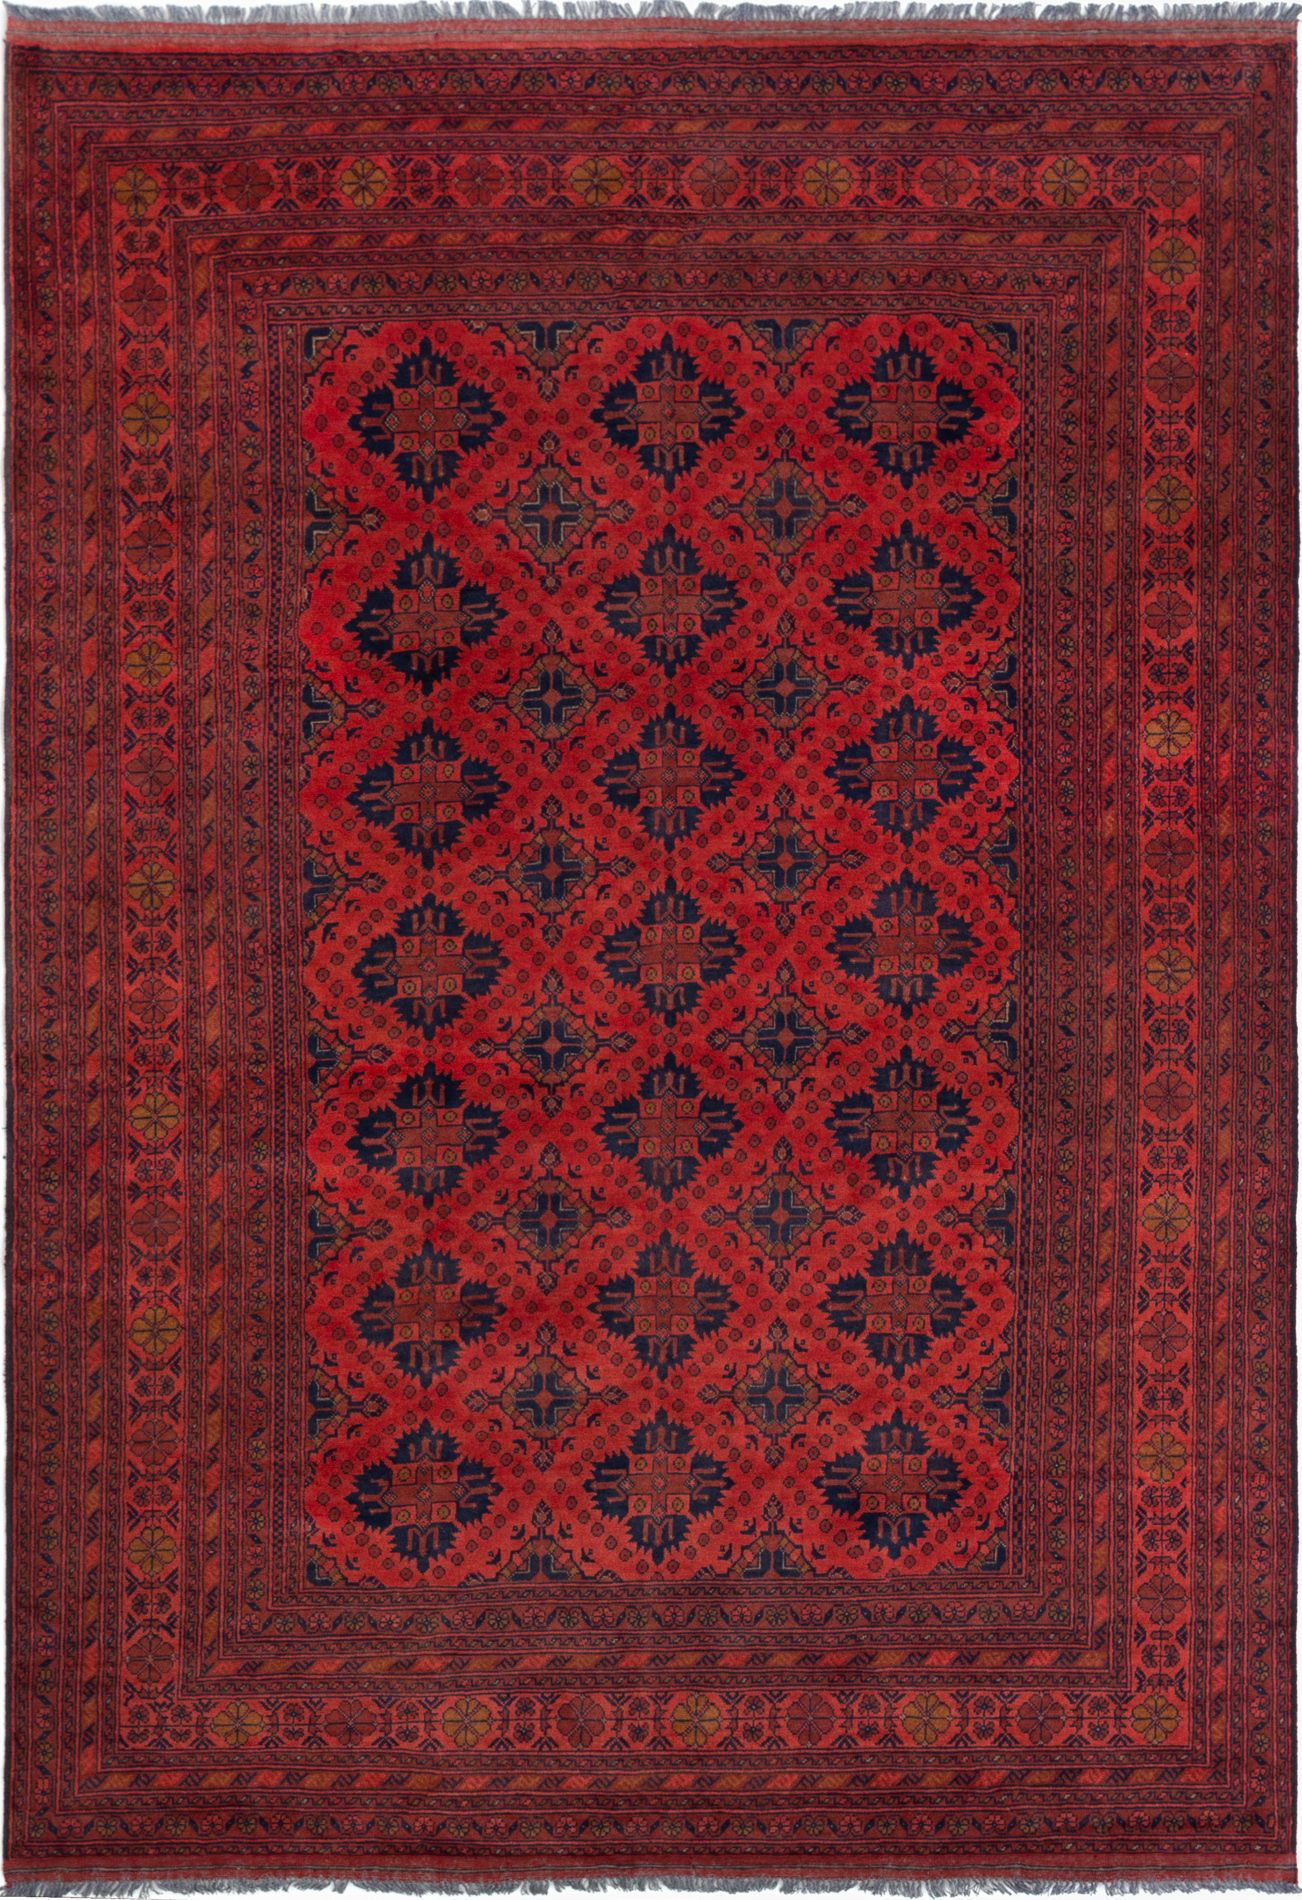 Hand-knotted Finest Khal Mohammadi Red Wool Rug 6'10" x 9'8" Size: 6'10" x 9'8"  